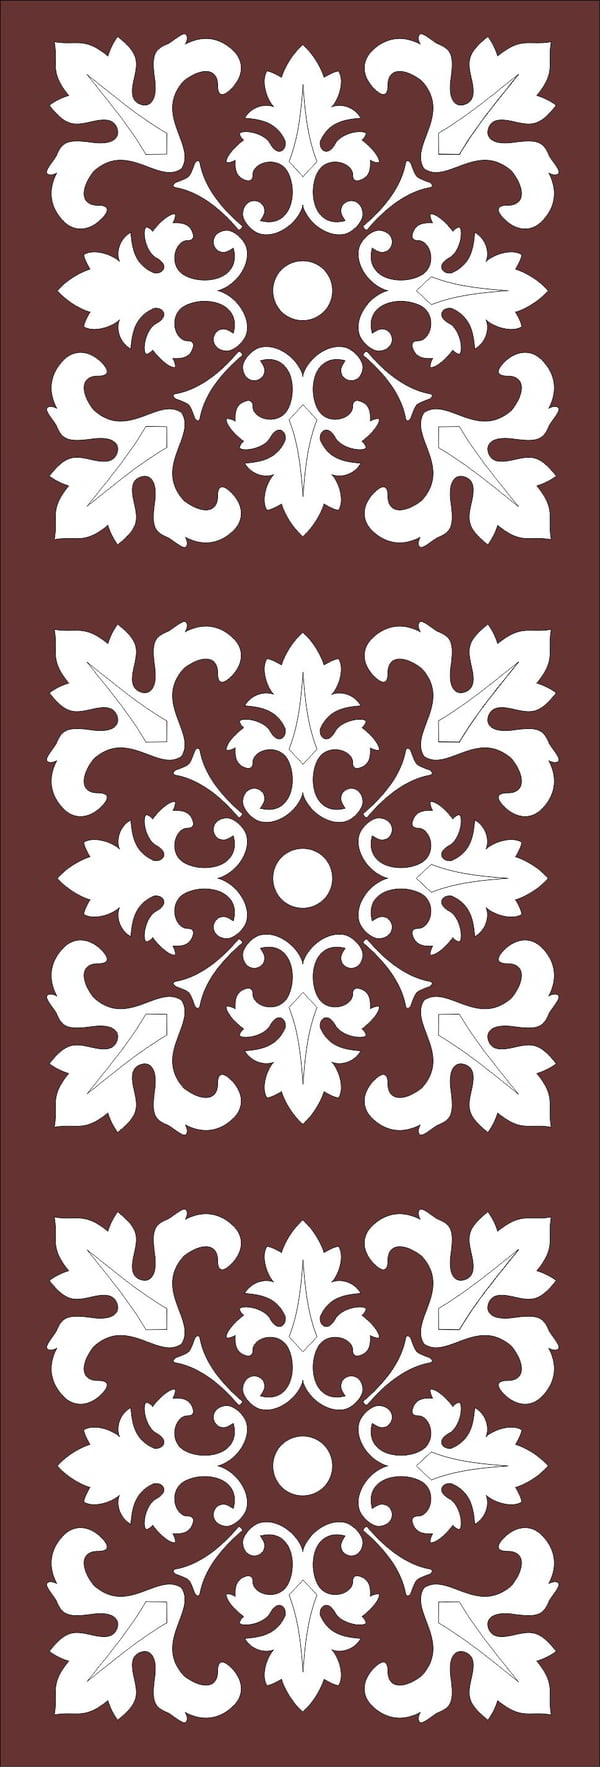 Laser Cut Divider Seamless Floral Grill Pattern Download Free Vector